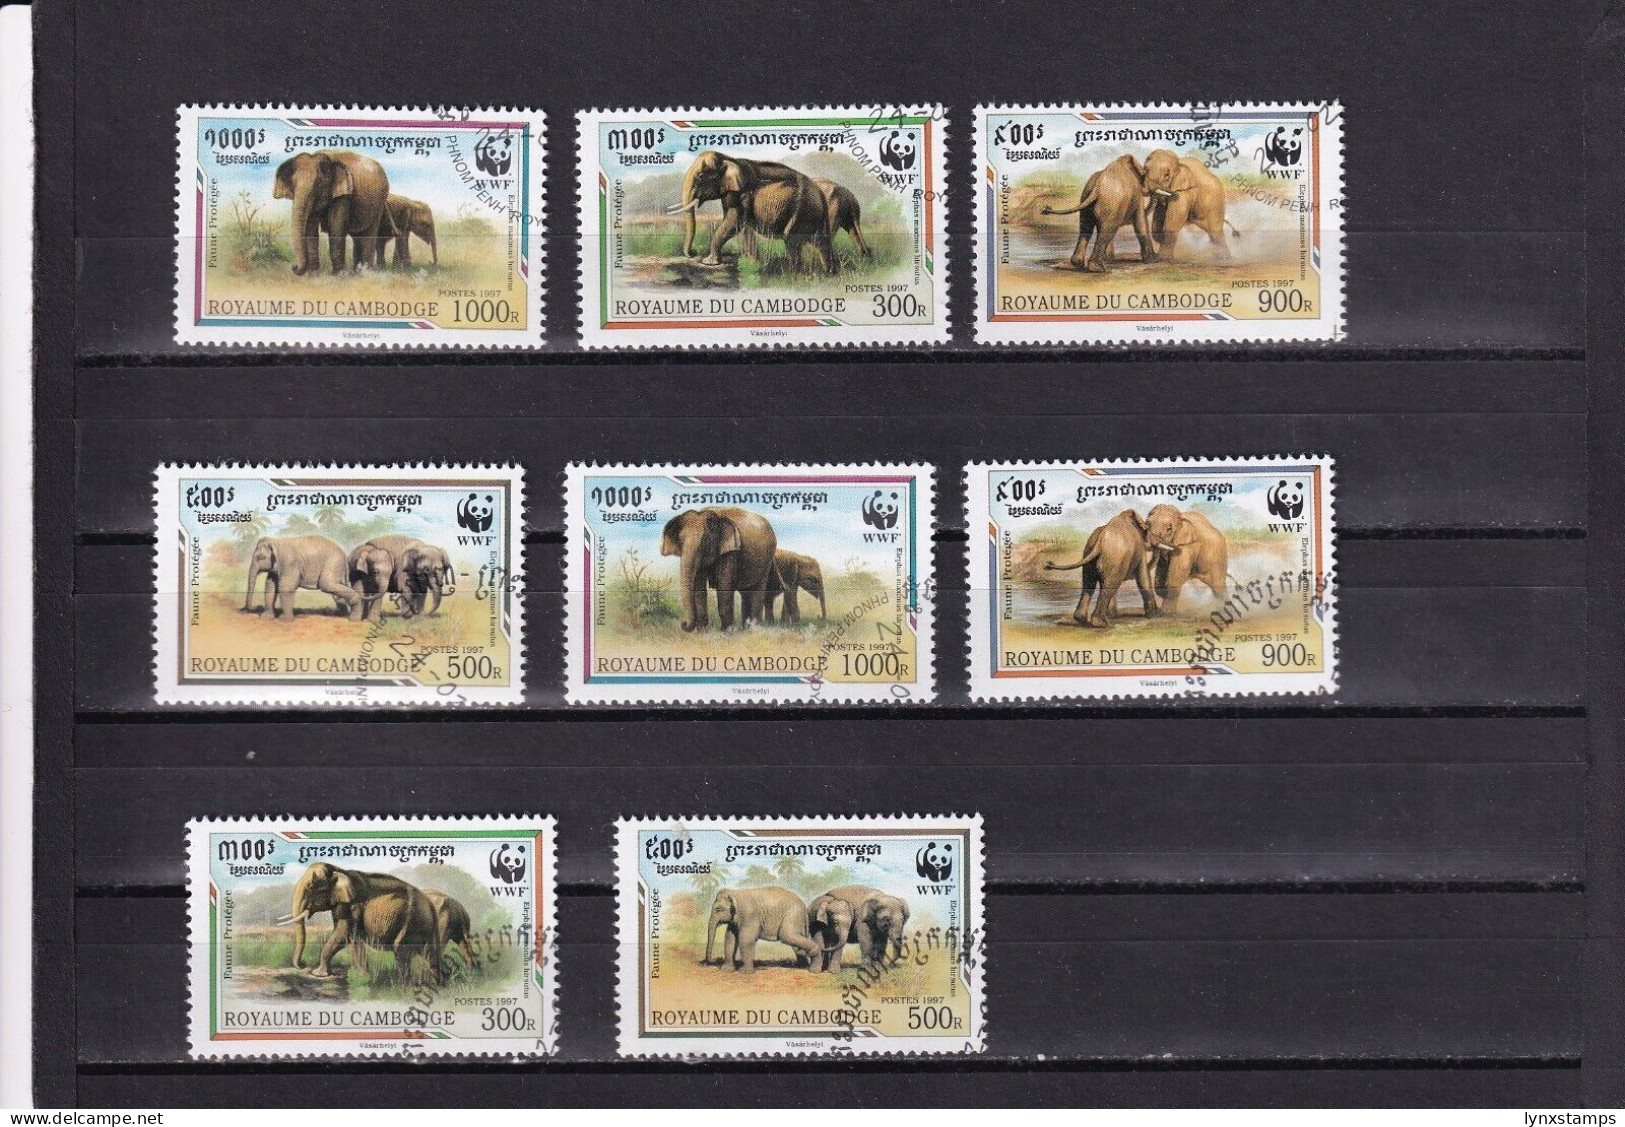 SA03 Cambodia 1997 The Indian Elephant Used Stamps - Elefanten